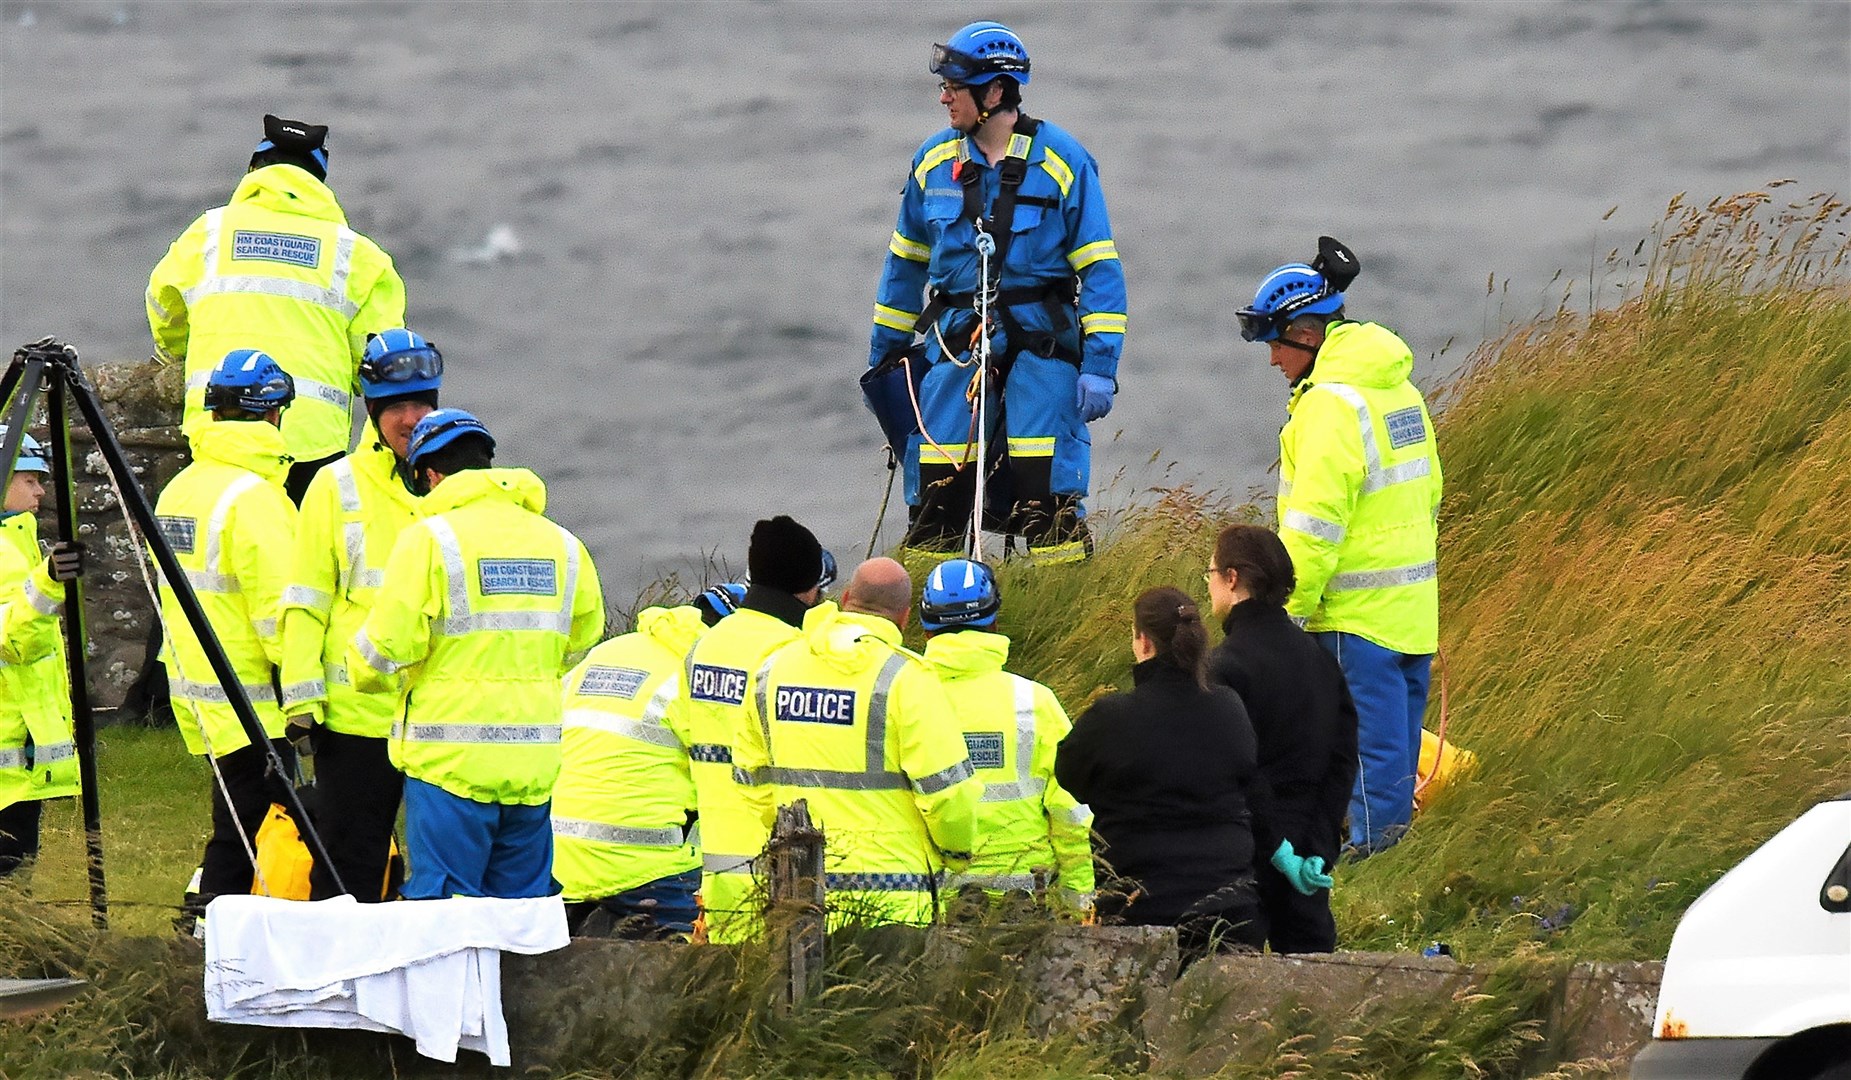 A coastguard volunteer can be seen ready to descend the cliff at Victoria Walk where the fatality occurred on Monday evening. Picture: Mel Roger